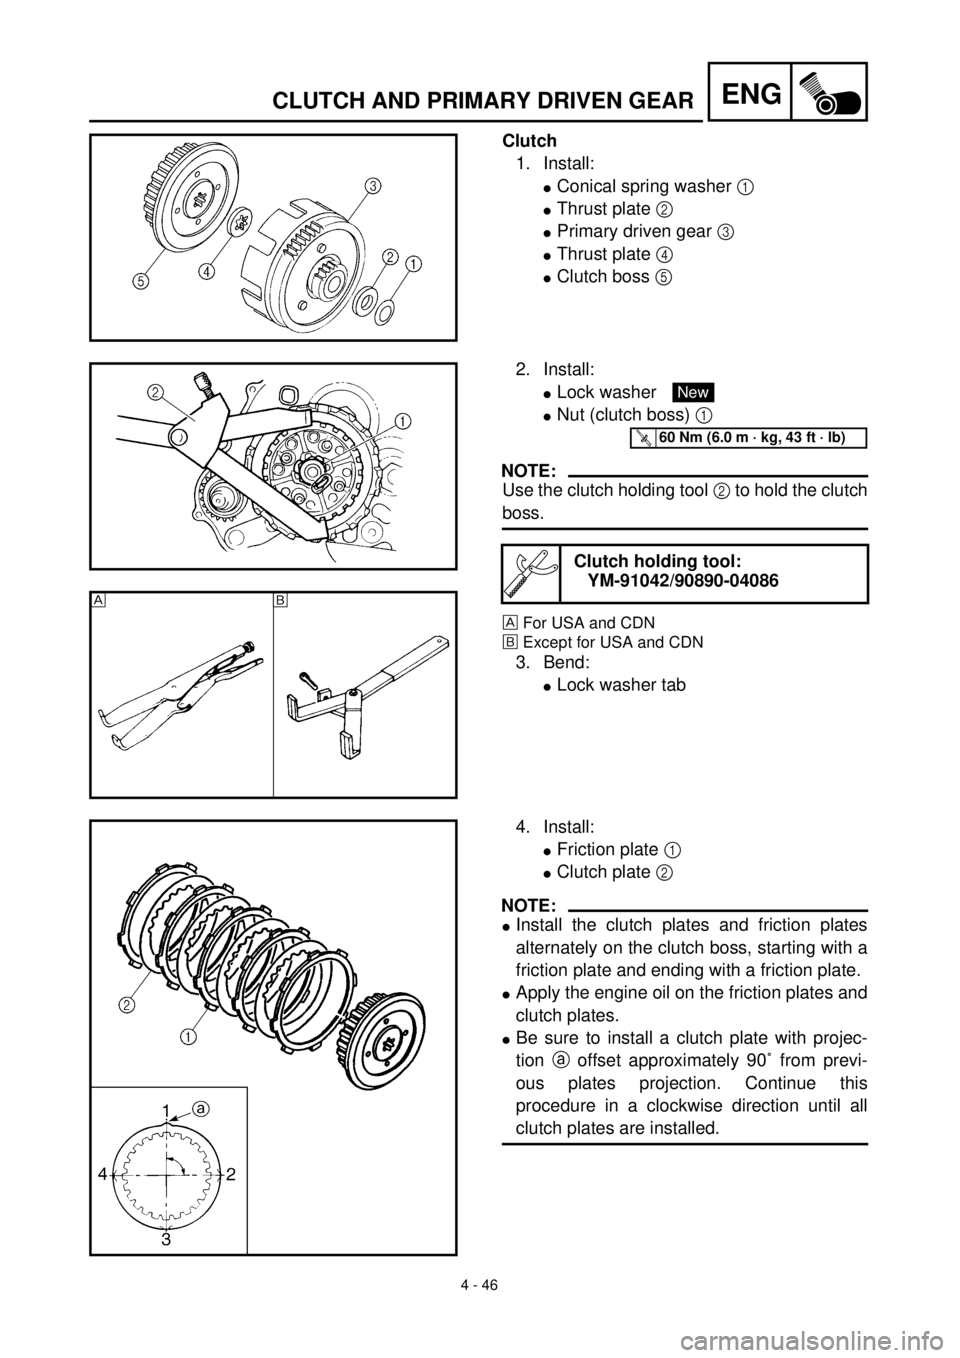 YAMAHA TTR125 2000  Notices Demploi (in French) 4 - 46
ENGCLUTCH AND PRIMARY DRIVEN GEAR
Clutch
1. Install:
lConical spring washer 1 
lThrust plate 2 
lPrimary driven gear 3 
lThrust plate 4 
lClutch boss 5 
2. Install:
lLock washer 
lNut (clutch b